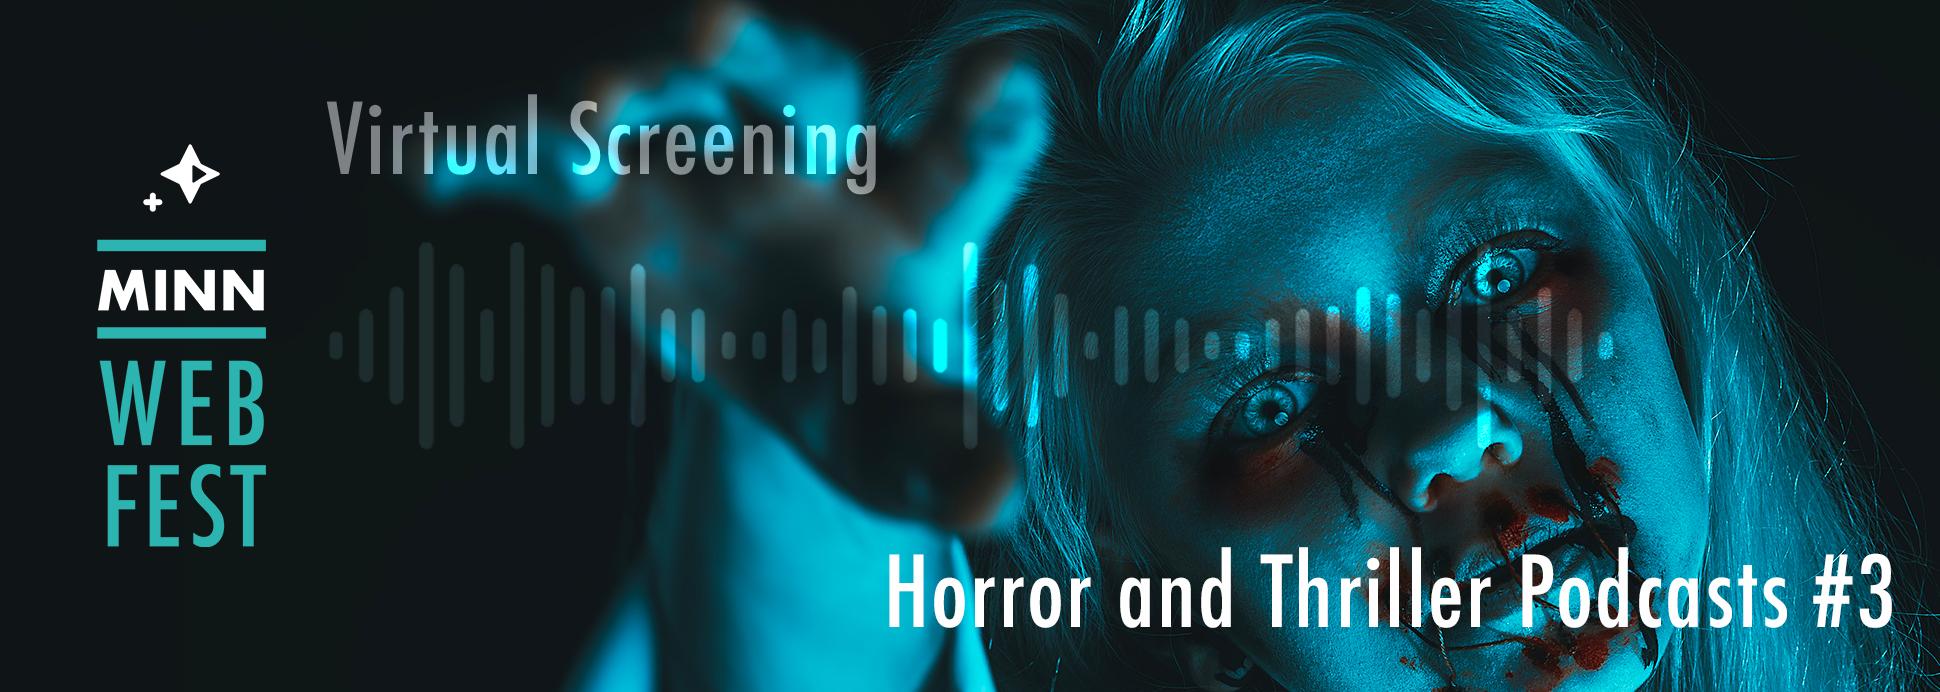 Horror and Thriller Podcasts #3